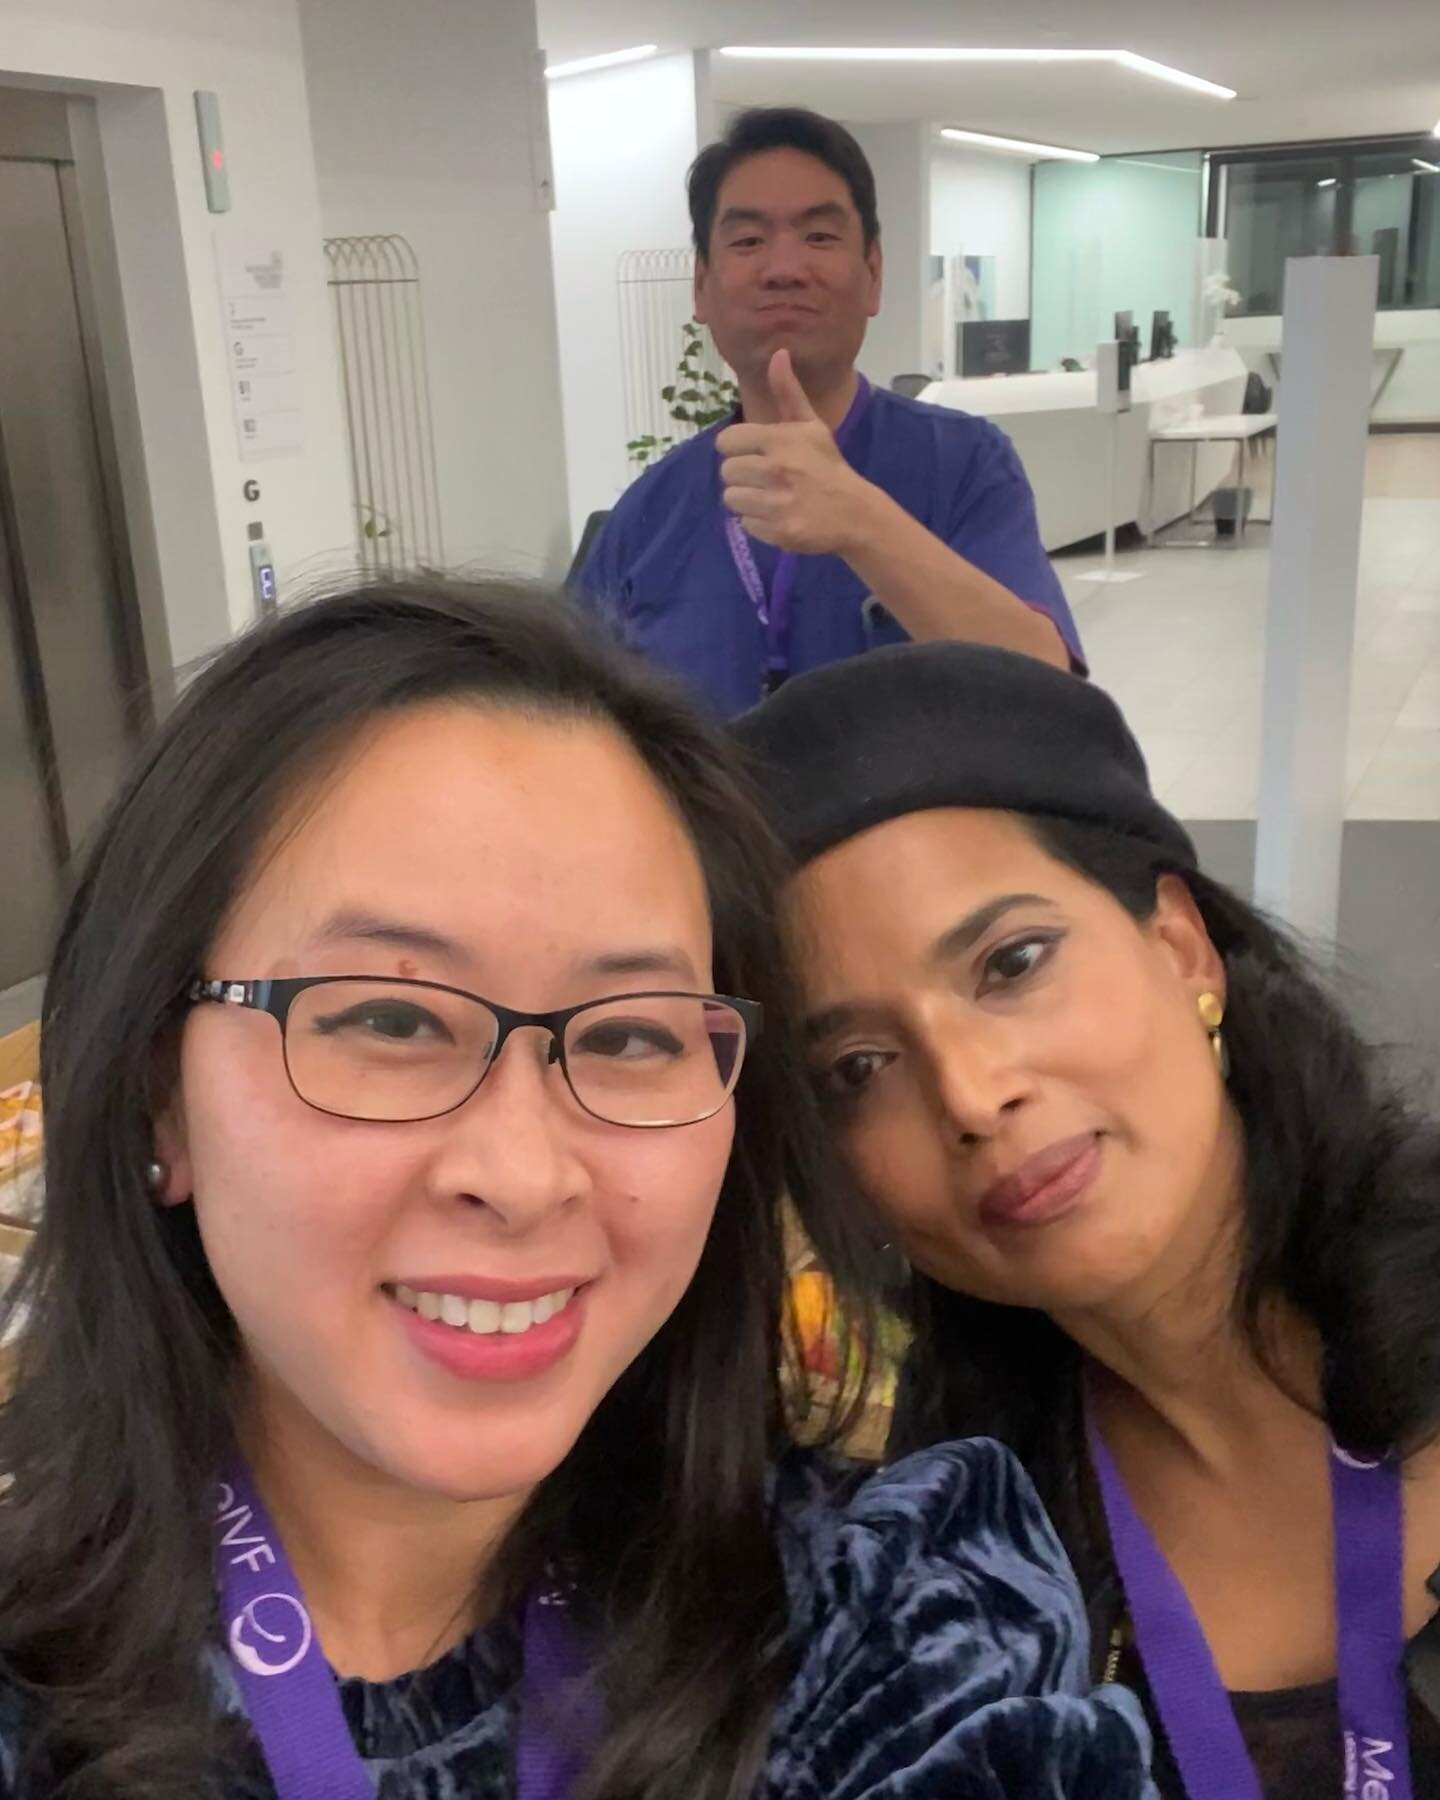 💜Fertility Team Templestowe 💜 Honored to present to GPs &amp; Allied Health at our Melbourne IVF Templestowe Clinic last night, alongside Dr Sam Soo &amp; @drkokum 🌱

We lead with our expertise in fertility preservation. 

We build on decades of e